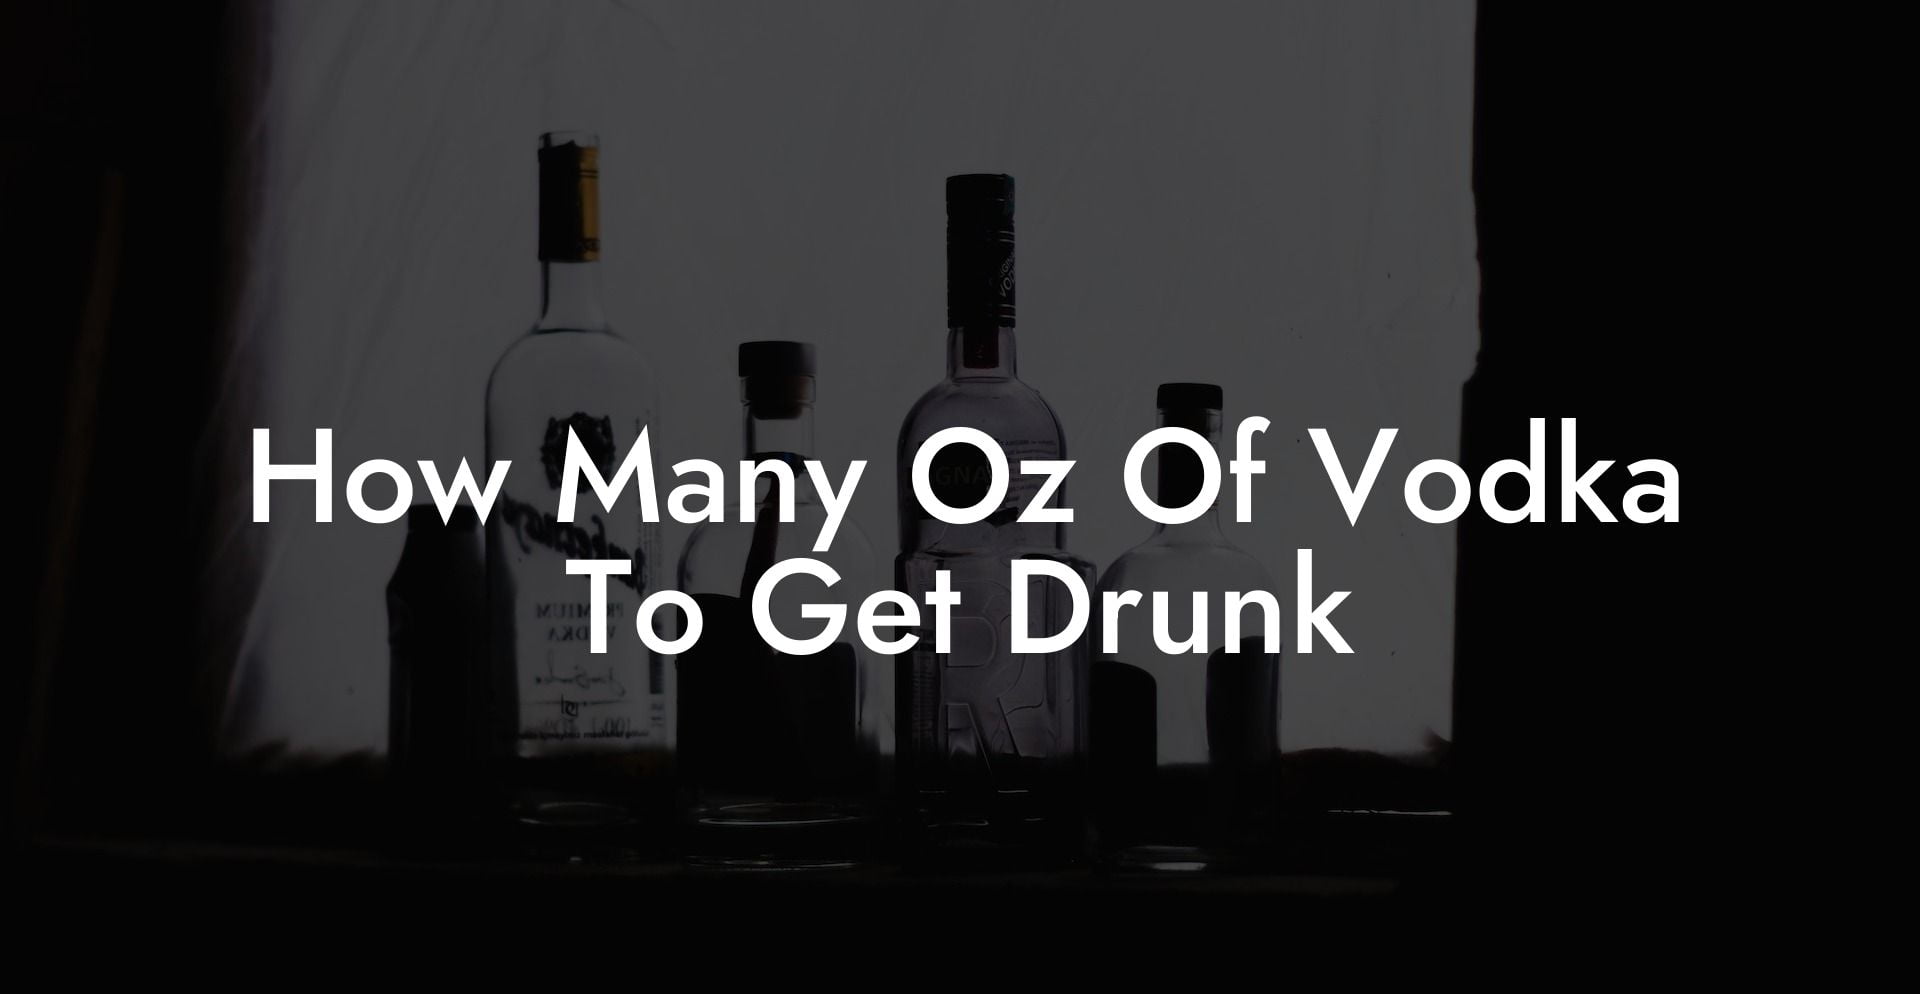 How Many Oz Of Vodka To Get Drunk